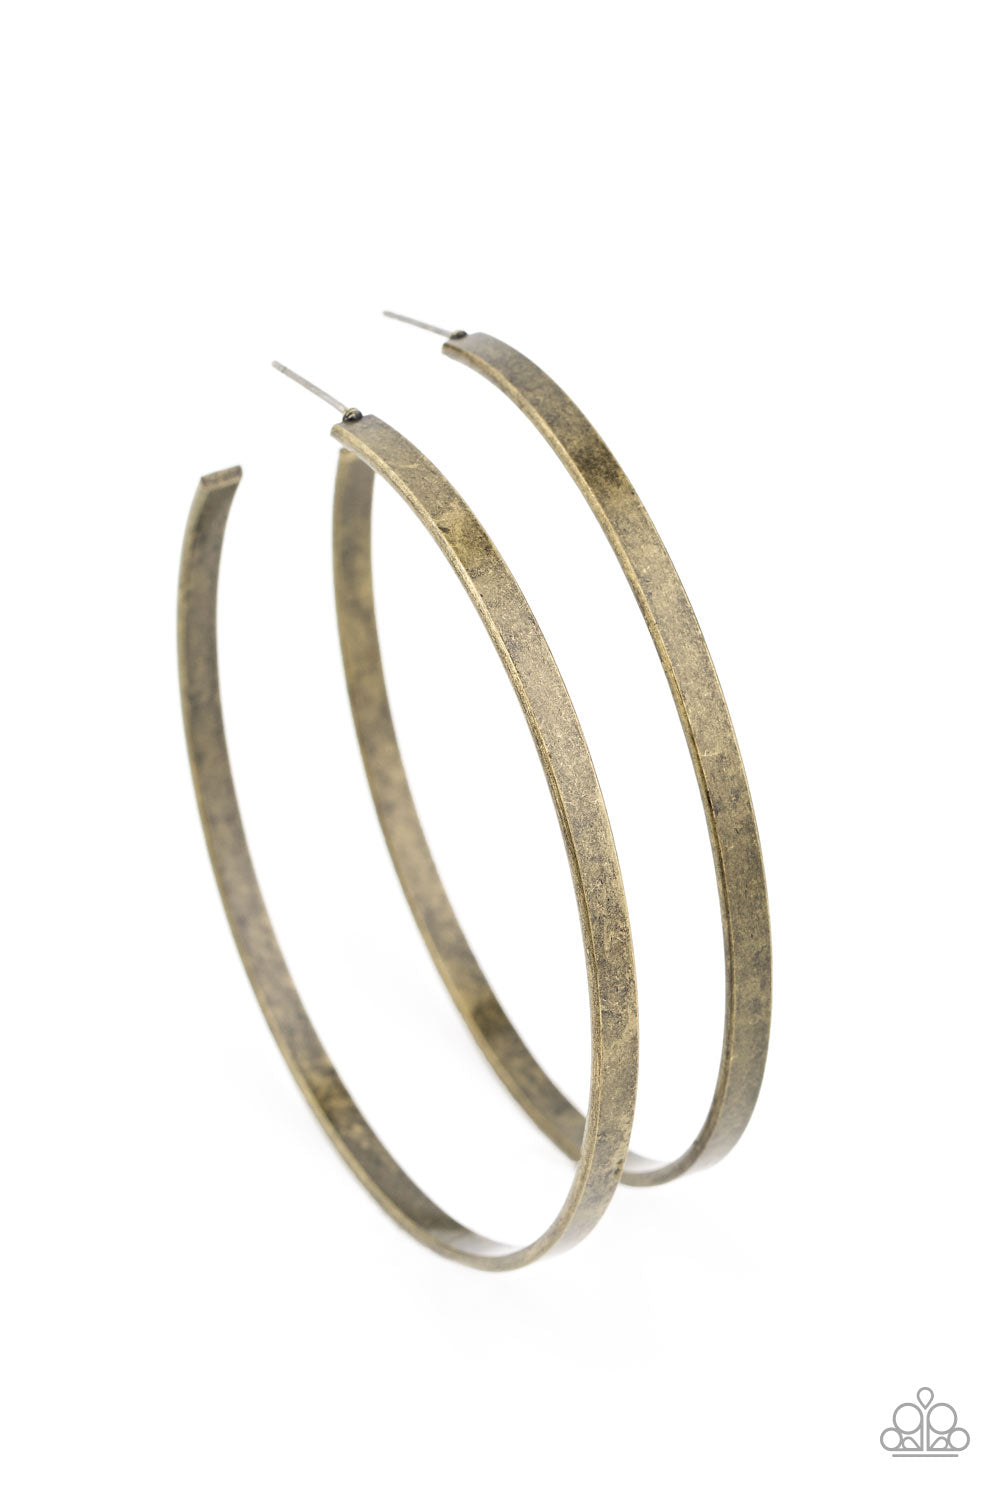 Lean Into The Curves - Brass Hoop Earrings - Princess Glam Shop